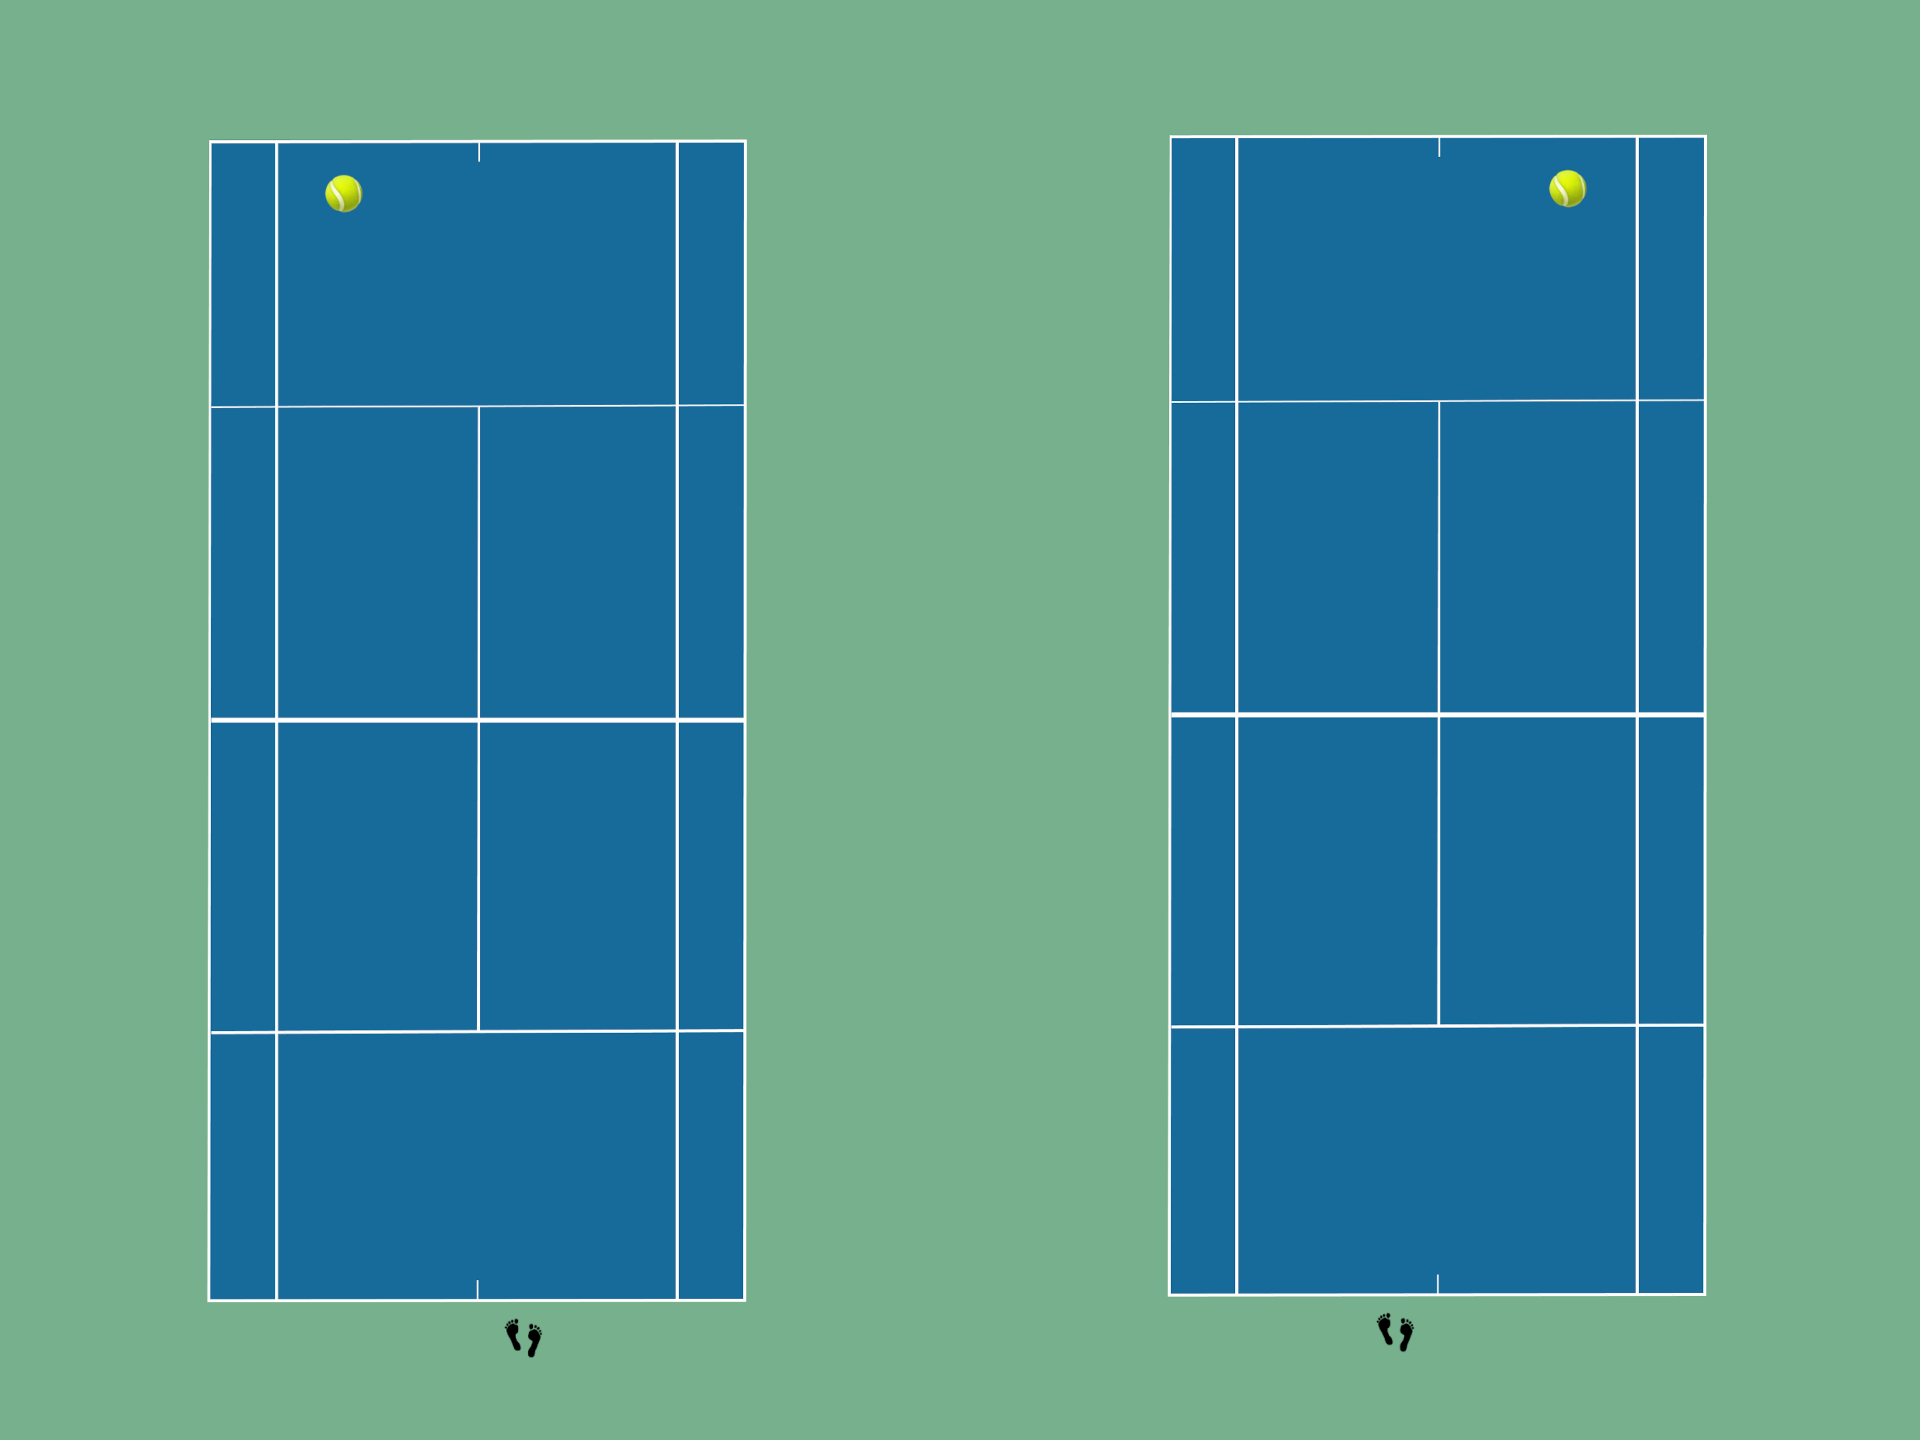 Correct tennis court positioning when your ball lands on the deuce or ad court